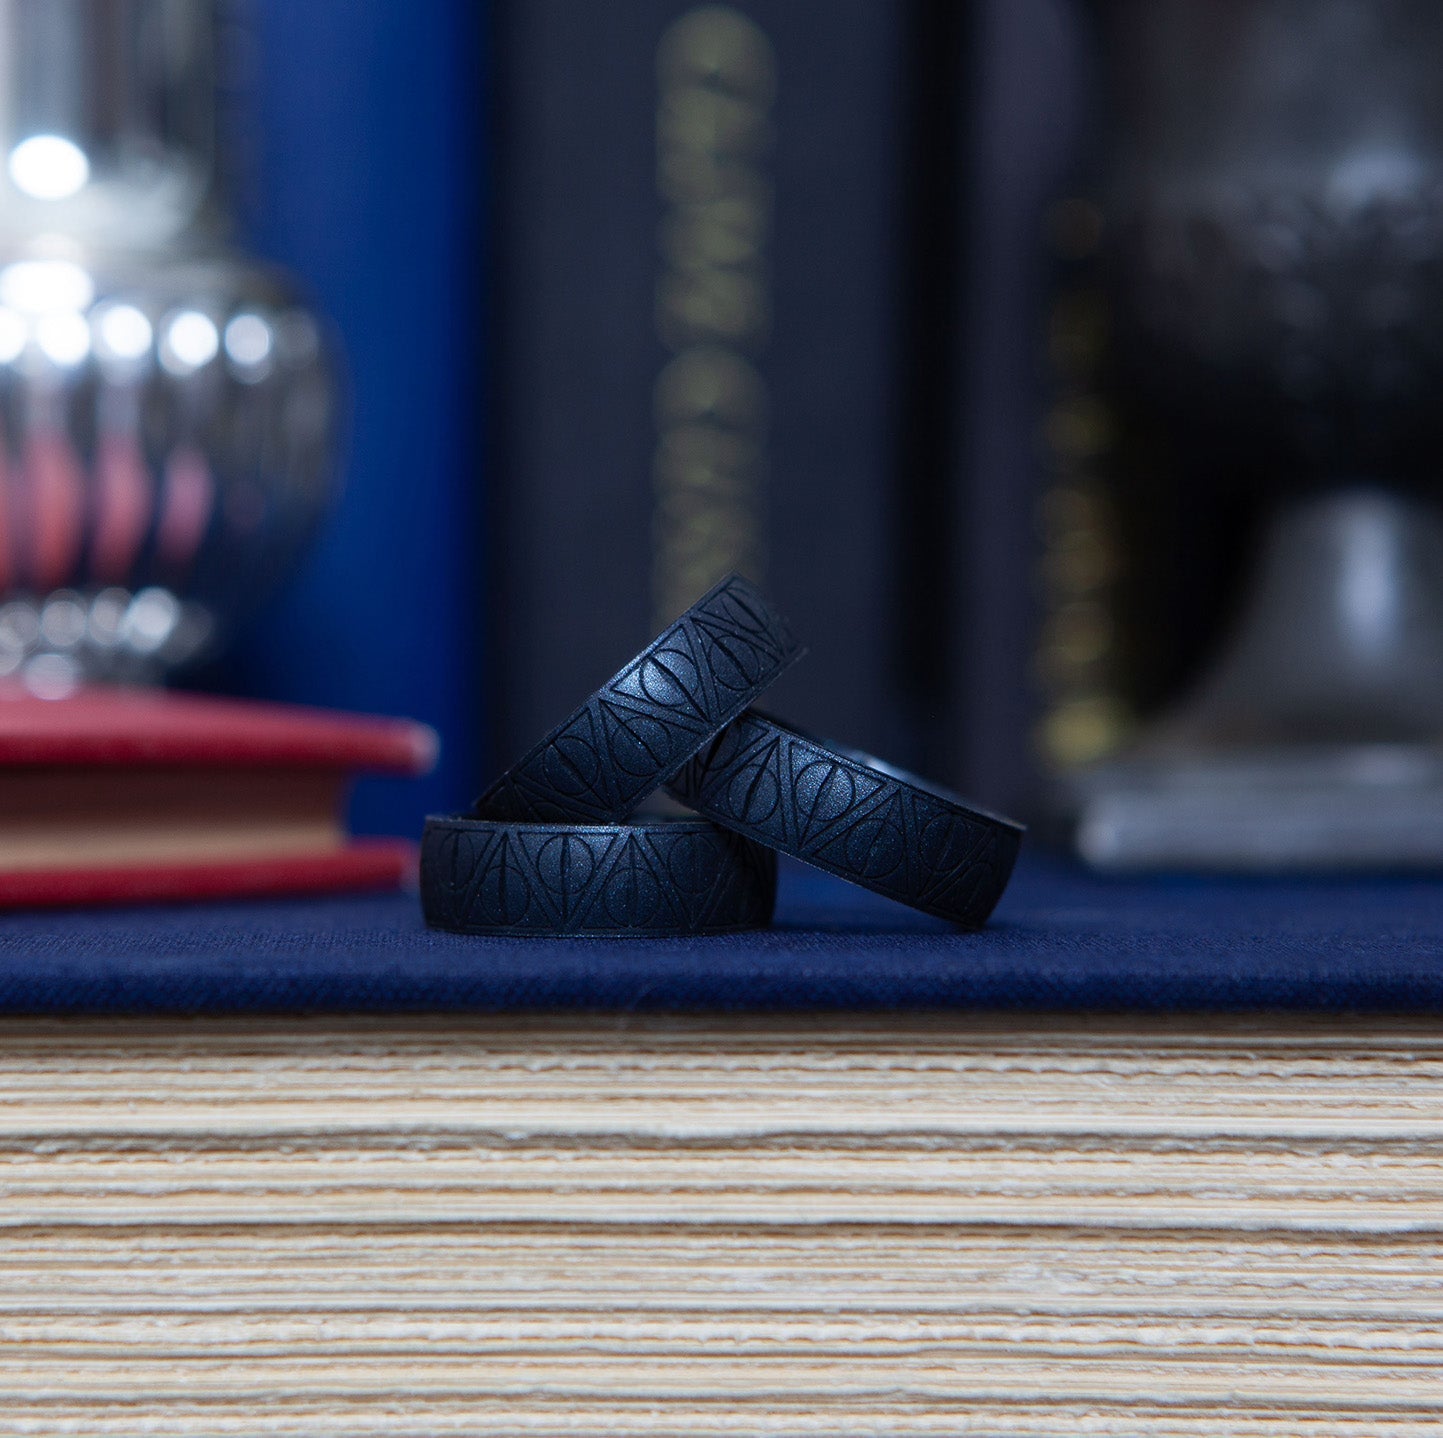 Enso Rings' Releases Harry Potter and LOTR Couple Rings